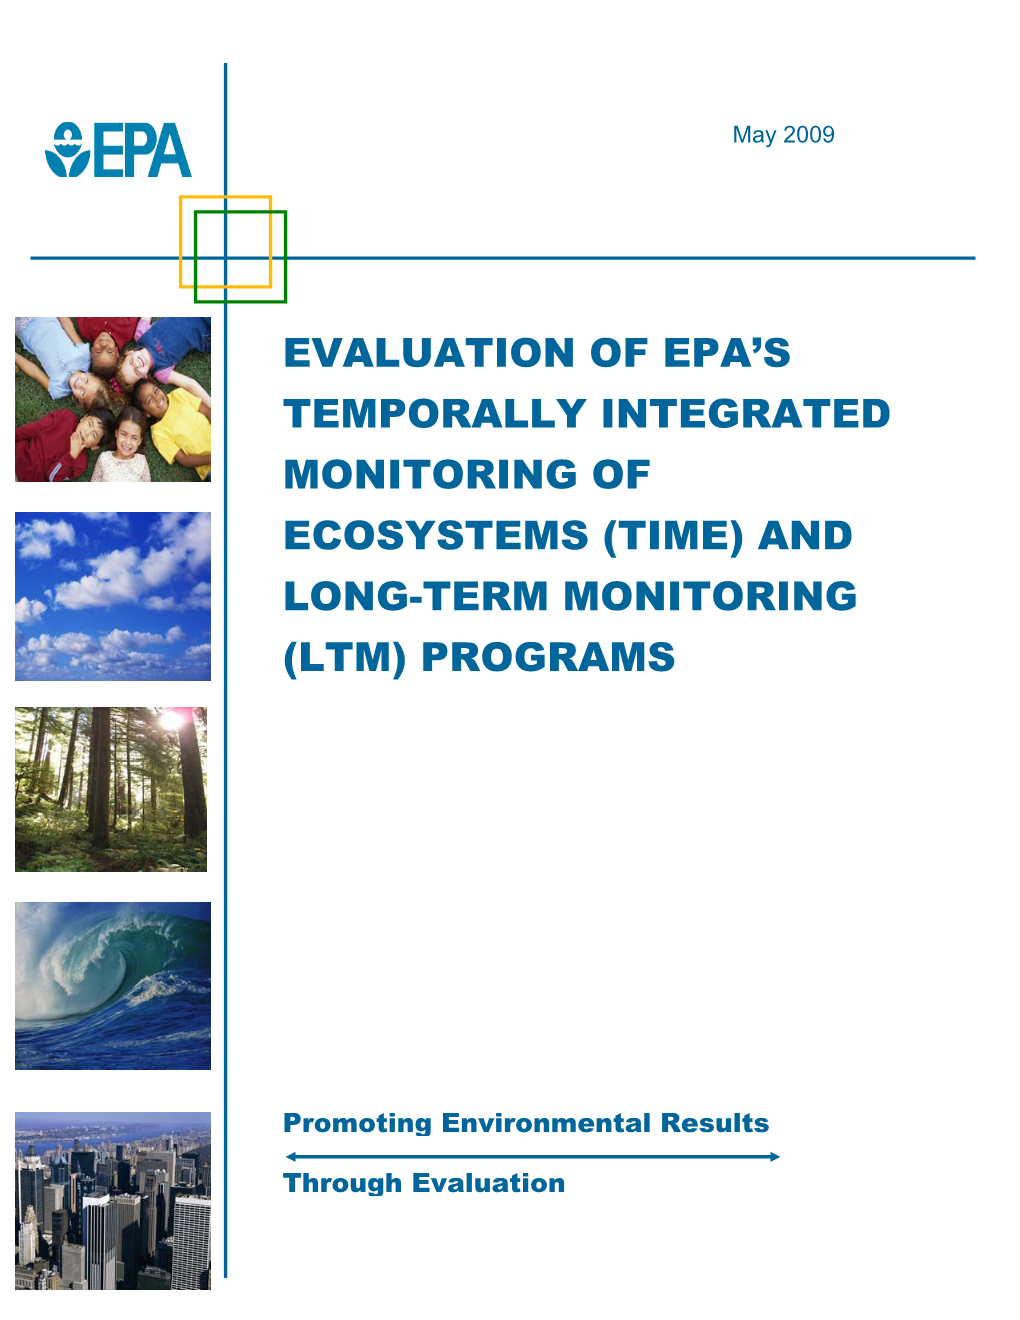 Evaluation of EPA's Temporally Integrated Monitoring of Ecosystems (TIME) and Long‐Term Monitoring (LTM) Programs: Evaluation Methodology